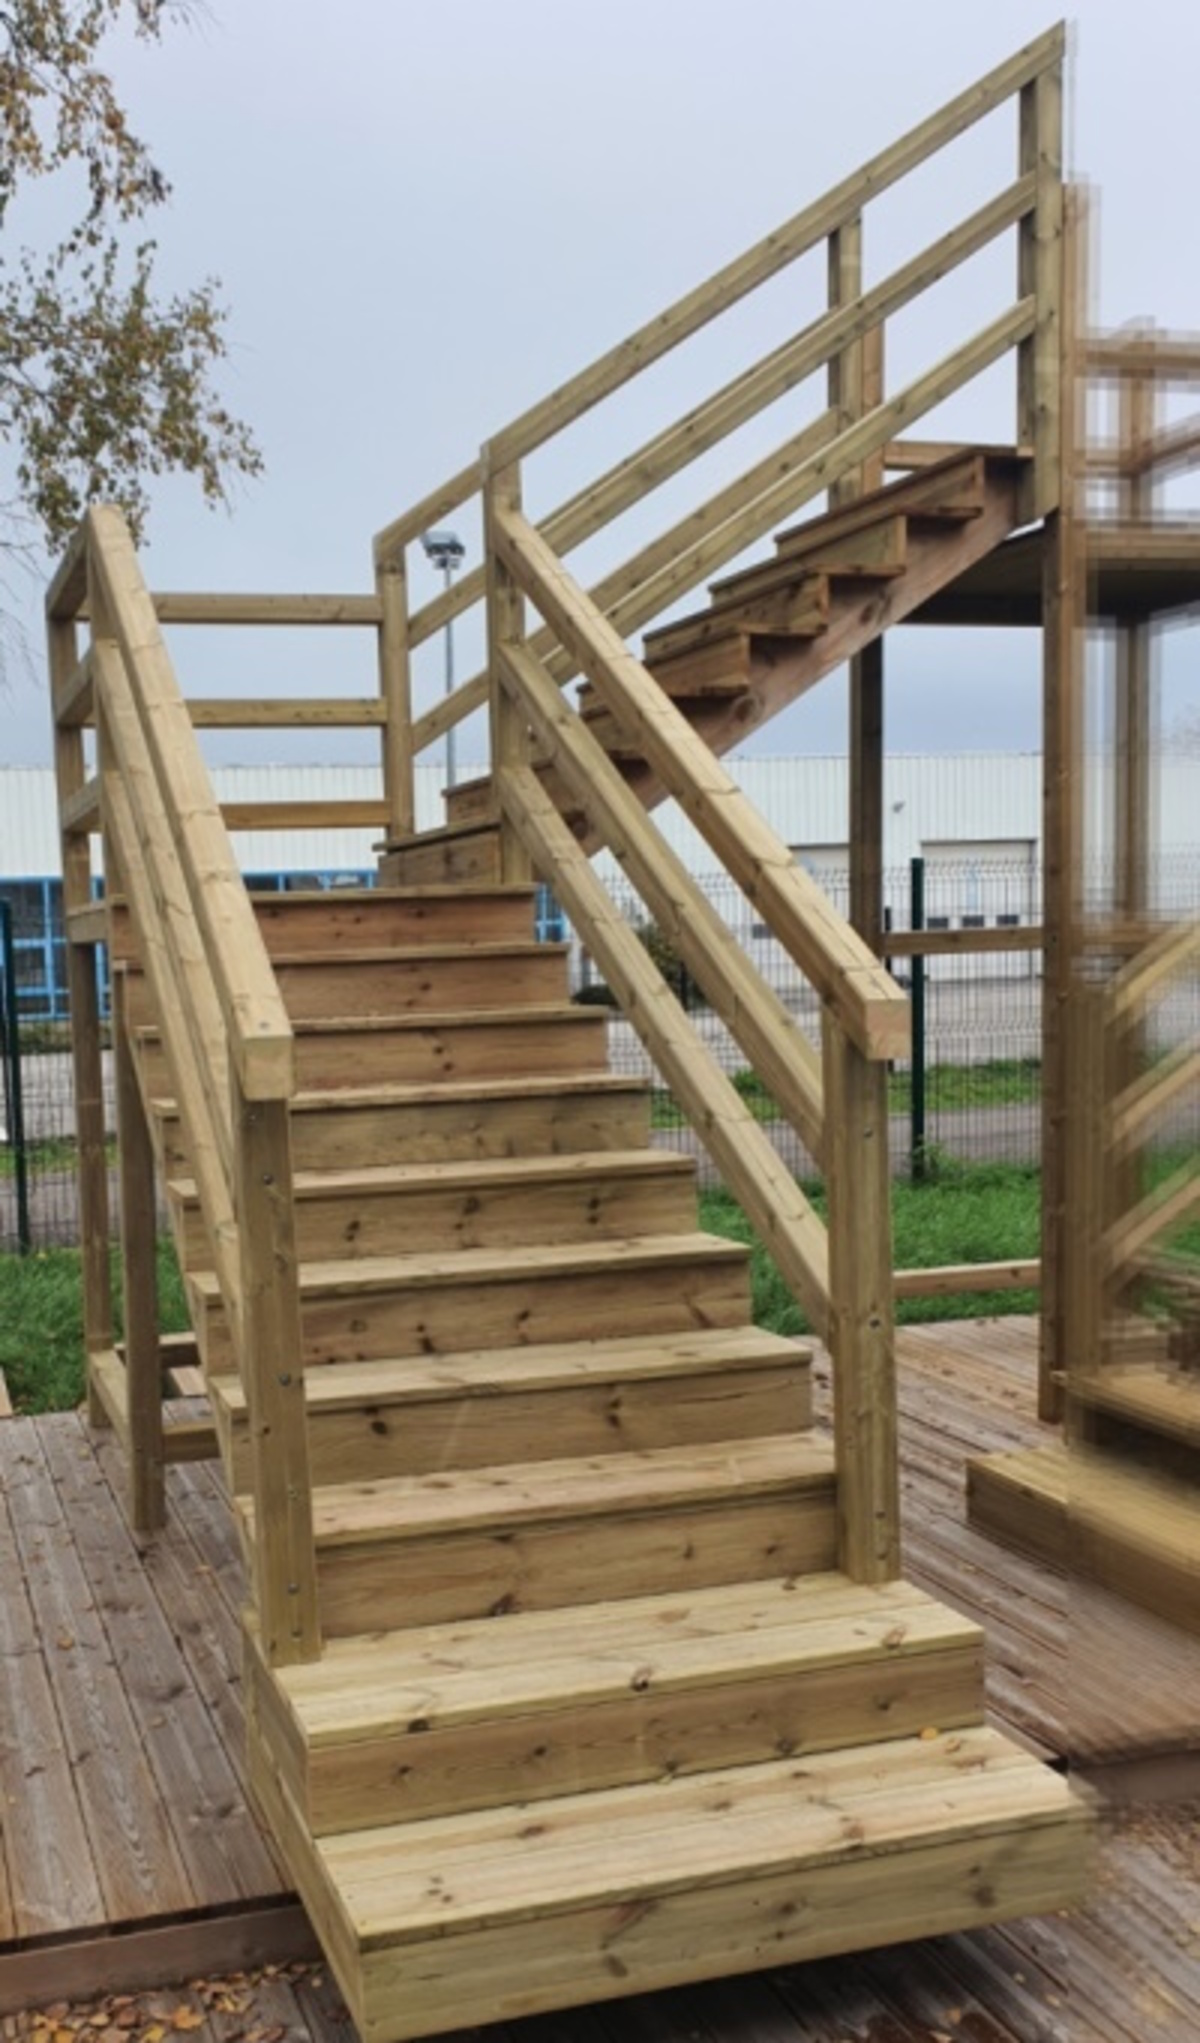 Deckstairs with landing and banister